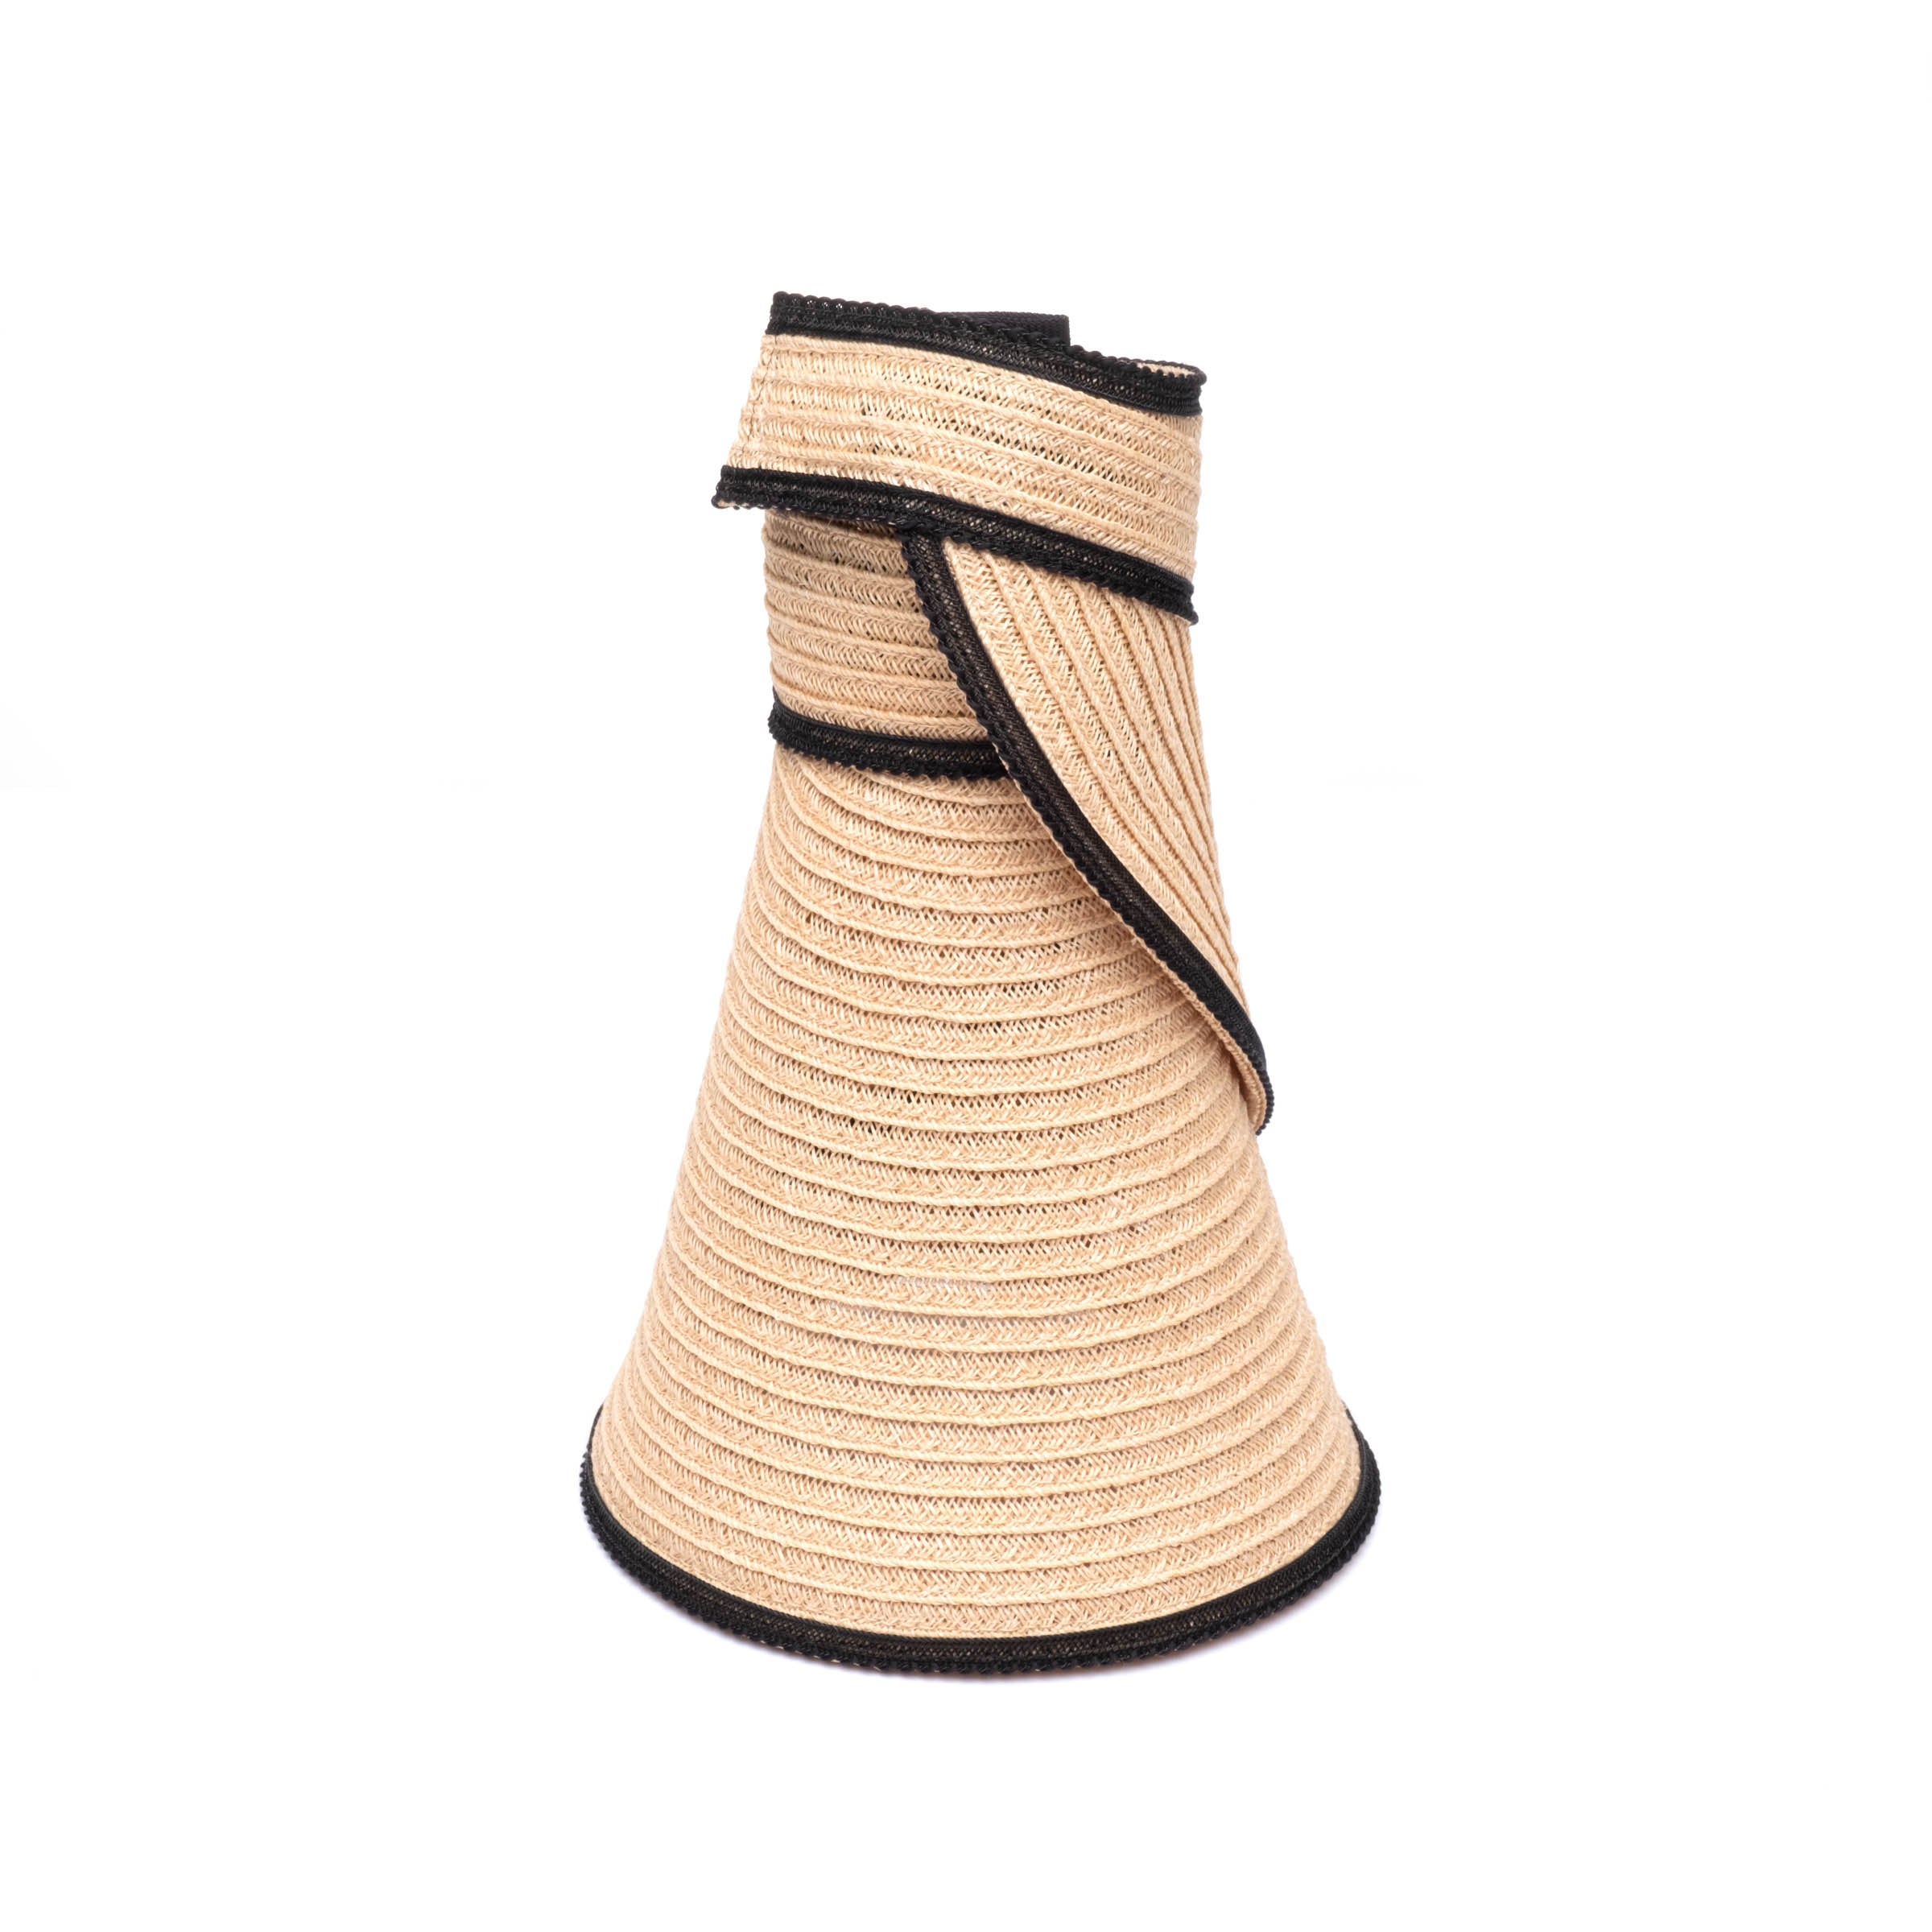 Eugenia Kim Trixie Visor in camel rolled product shot